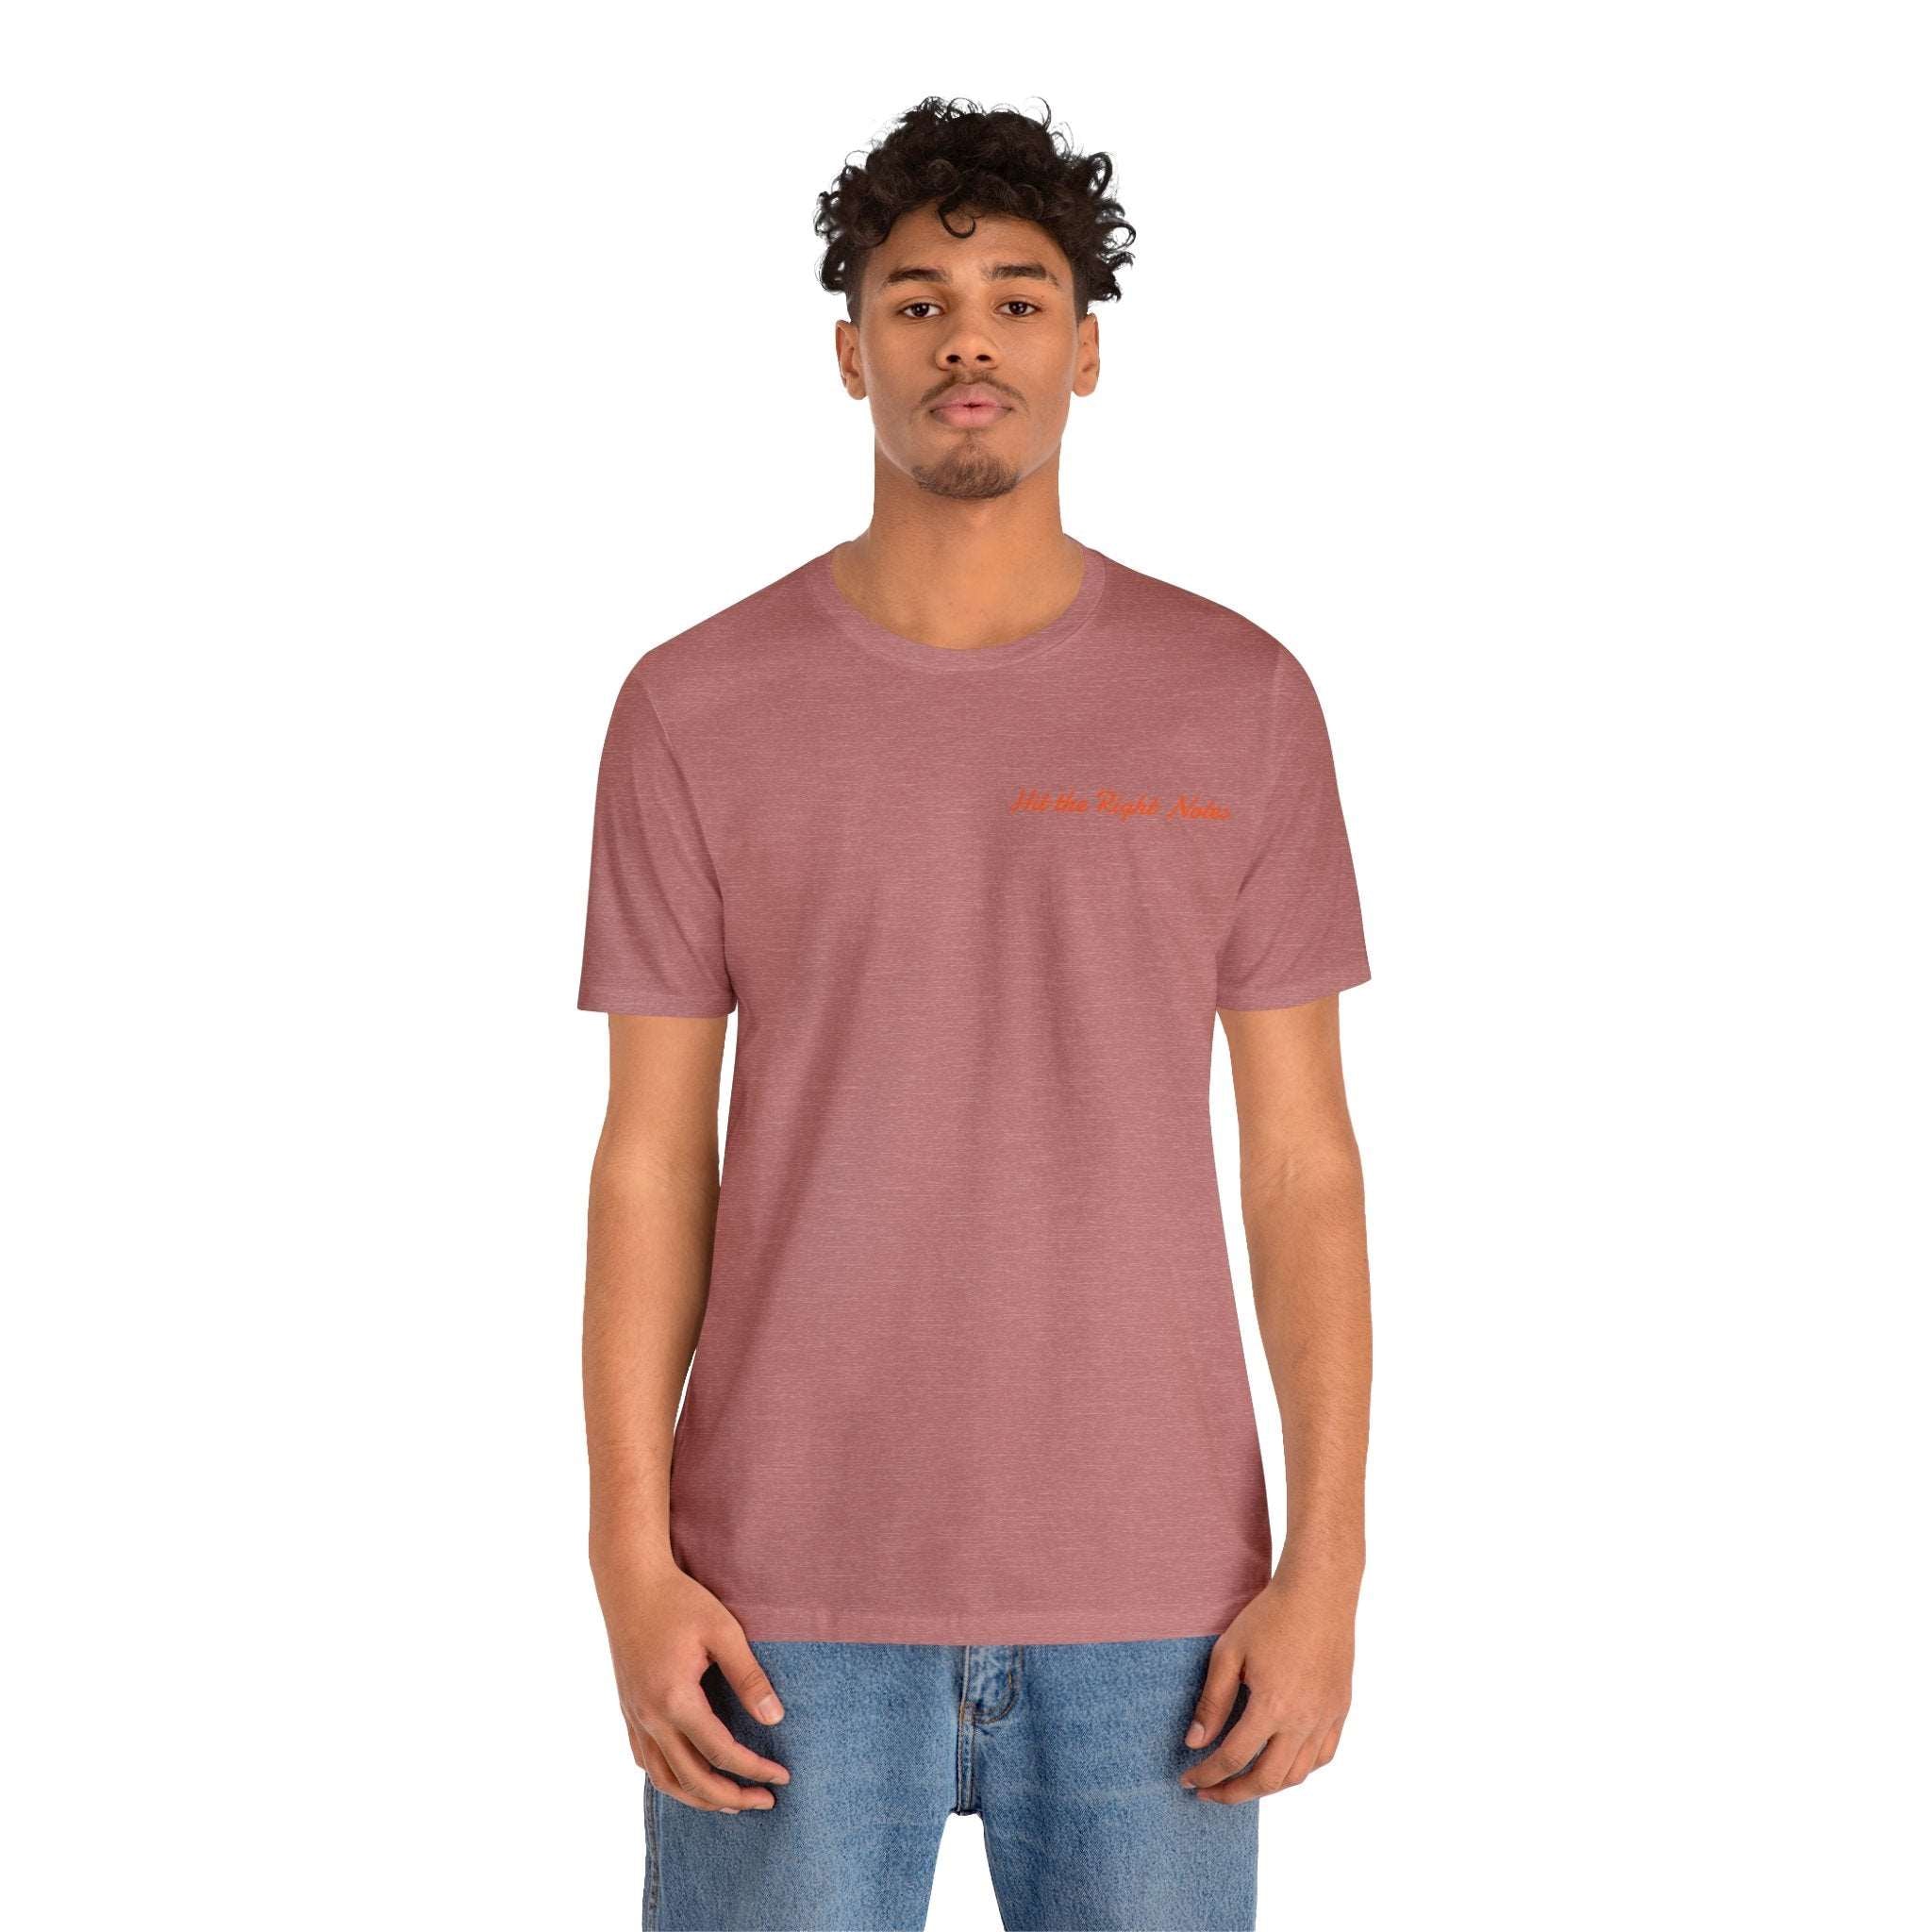 Hit the Right Notes Jersey Tee - Bella+Canvas 3001 Heather Mauve Classic Tee Comfortable Tee Cotton T-Shirt Graphic Tee JerseyTee Statement Shirt T-shirt Tee Unisex Apparel T-Shirt 12358632938387777320_2048_f058e87d-2344-4b89-9116-c4584fbcd35d Printify